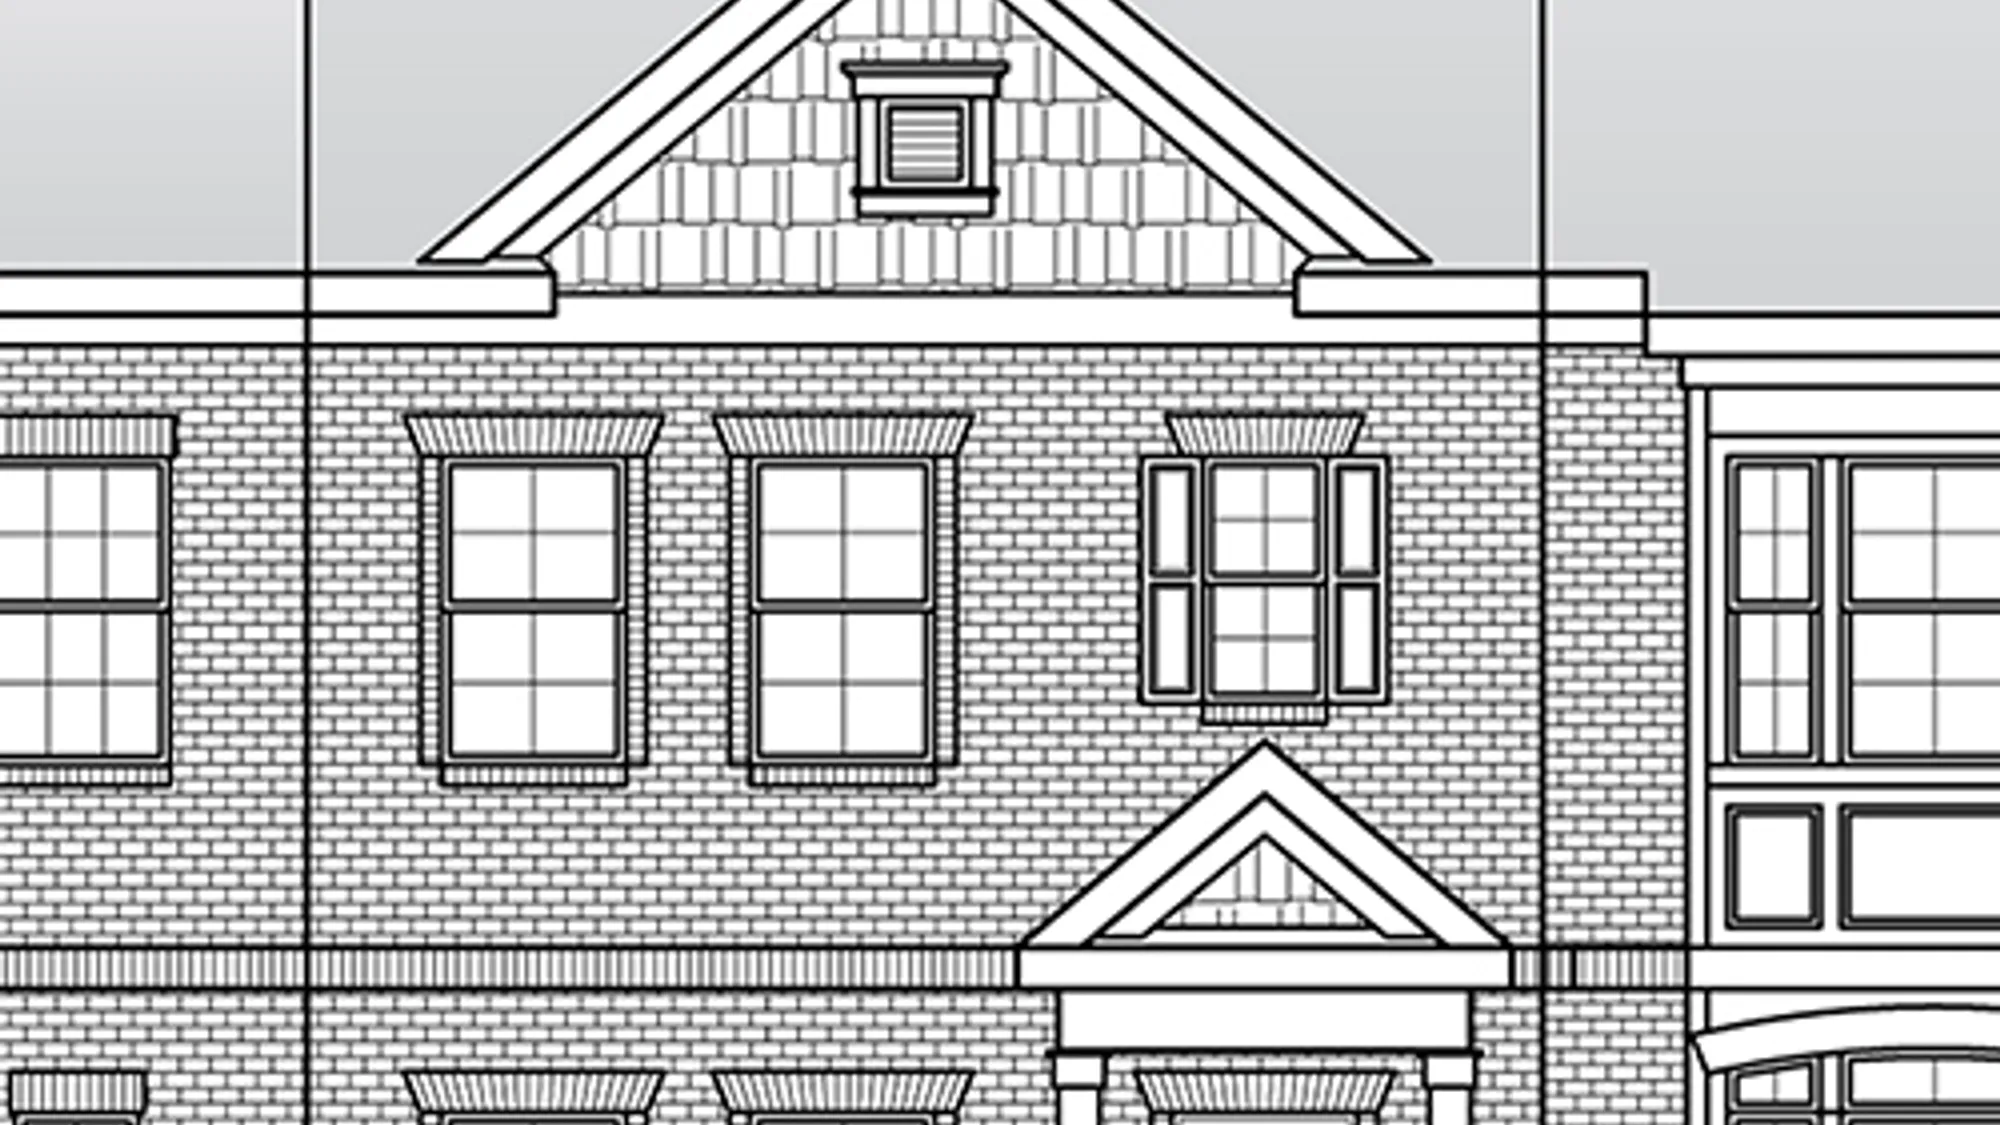 Emory II townhomes exterior elevation